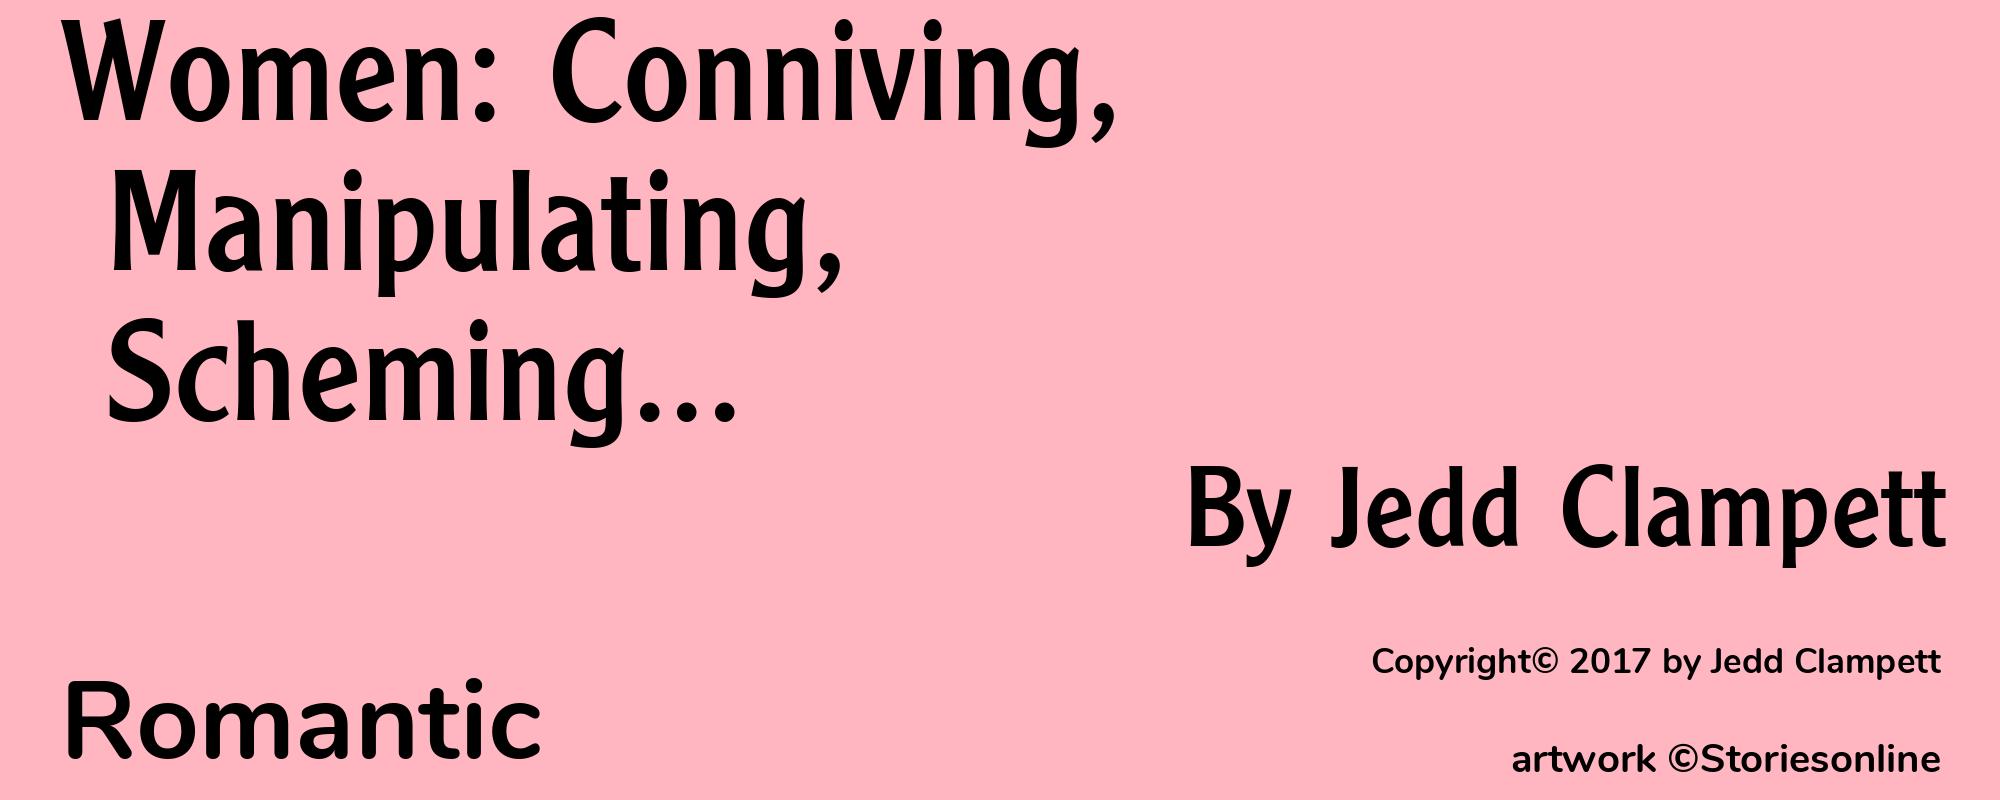 Women: Conniving, Manipulating, Scheming... - Cover